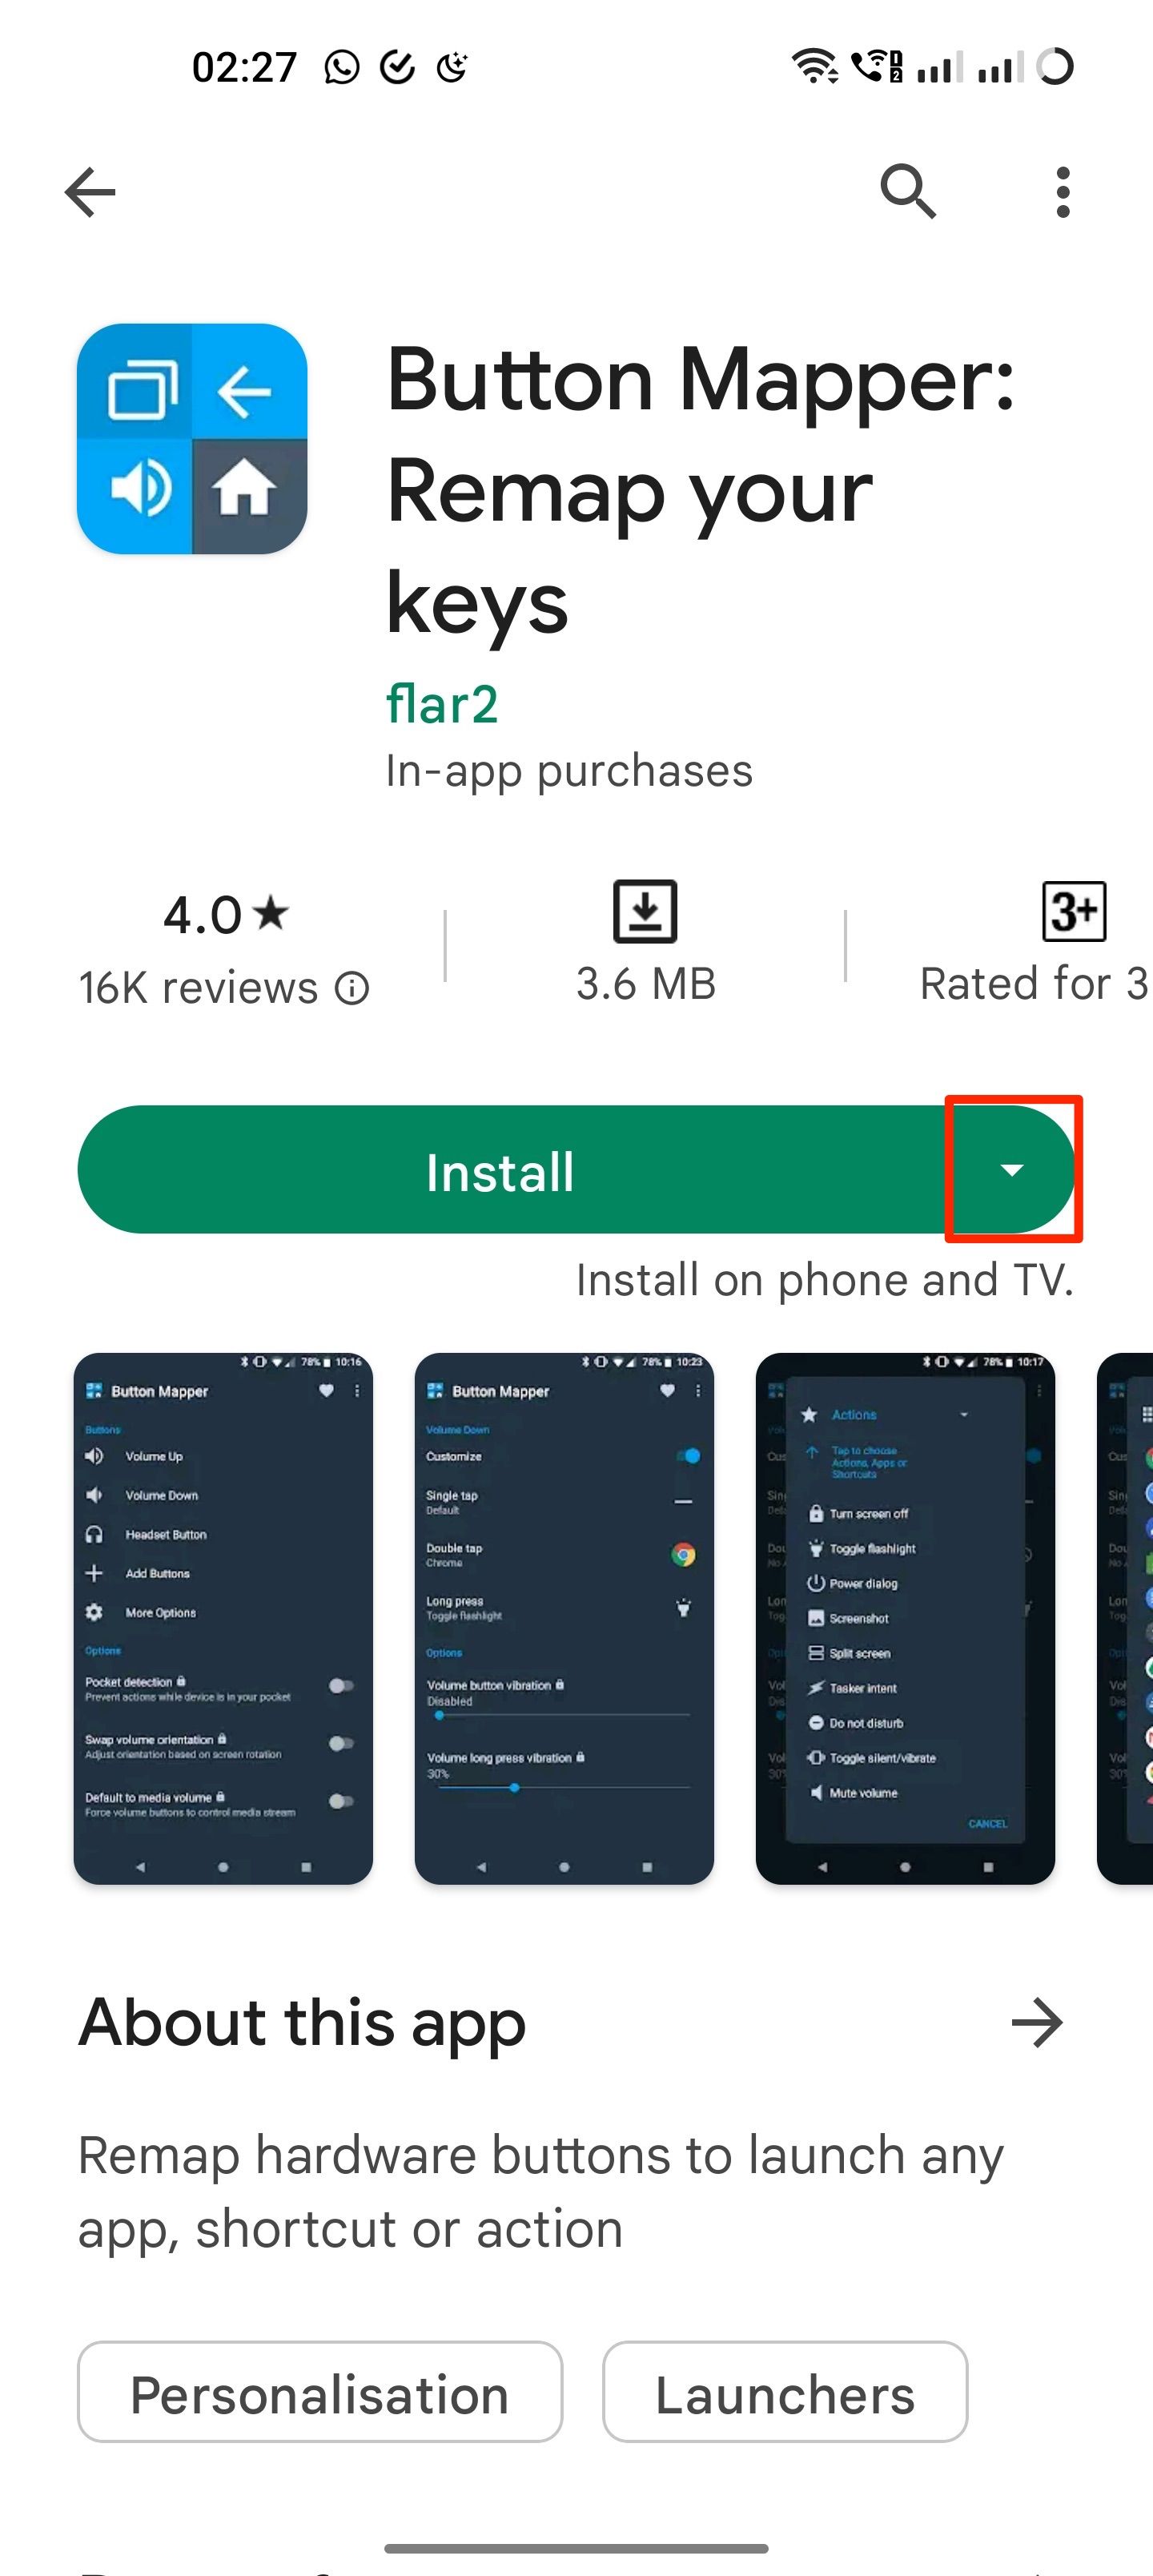 Play Store app page for installing the app on Google TV